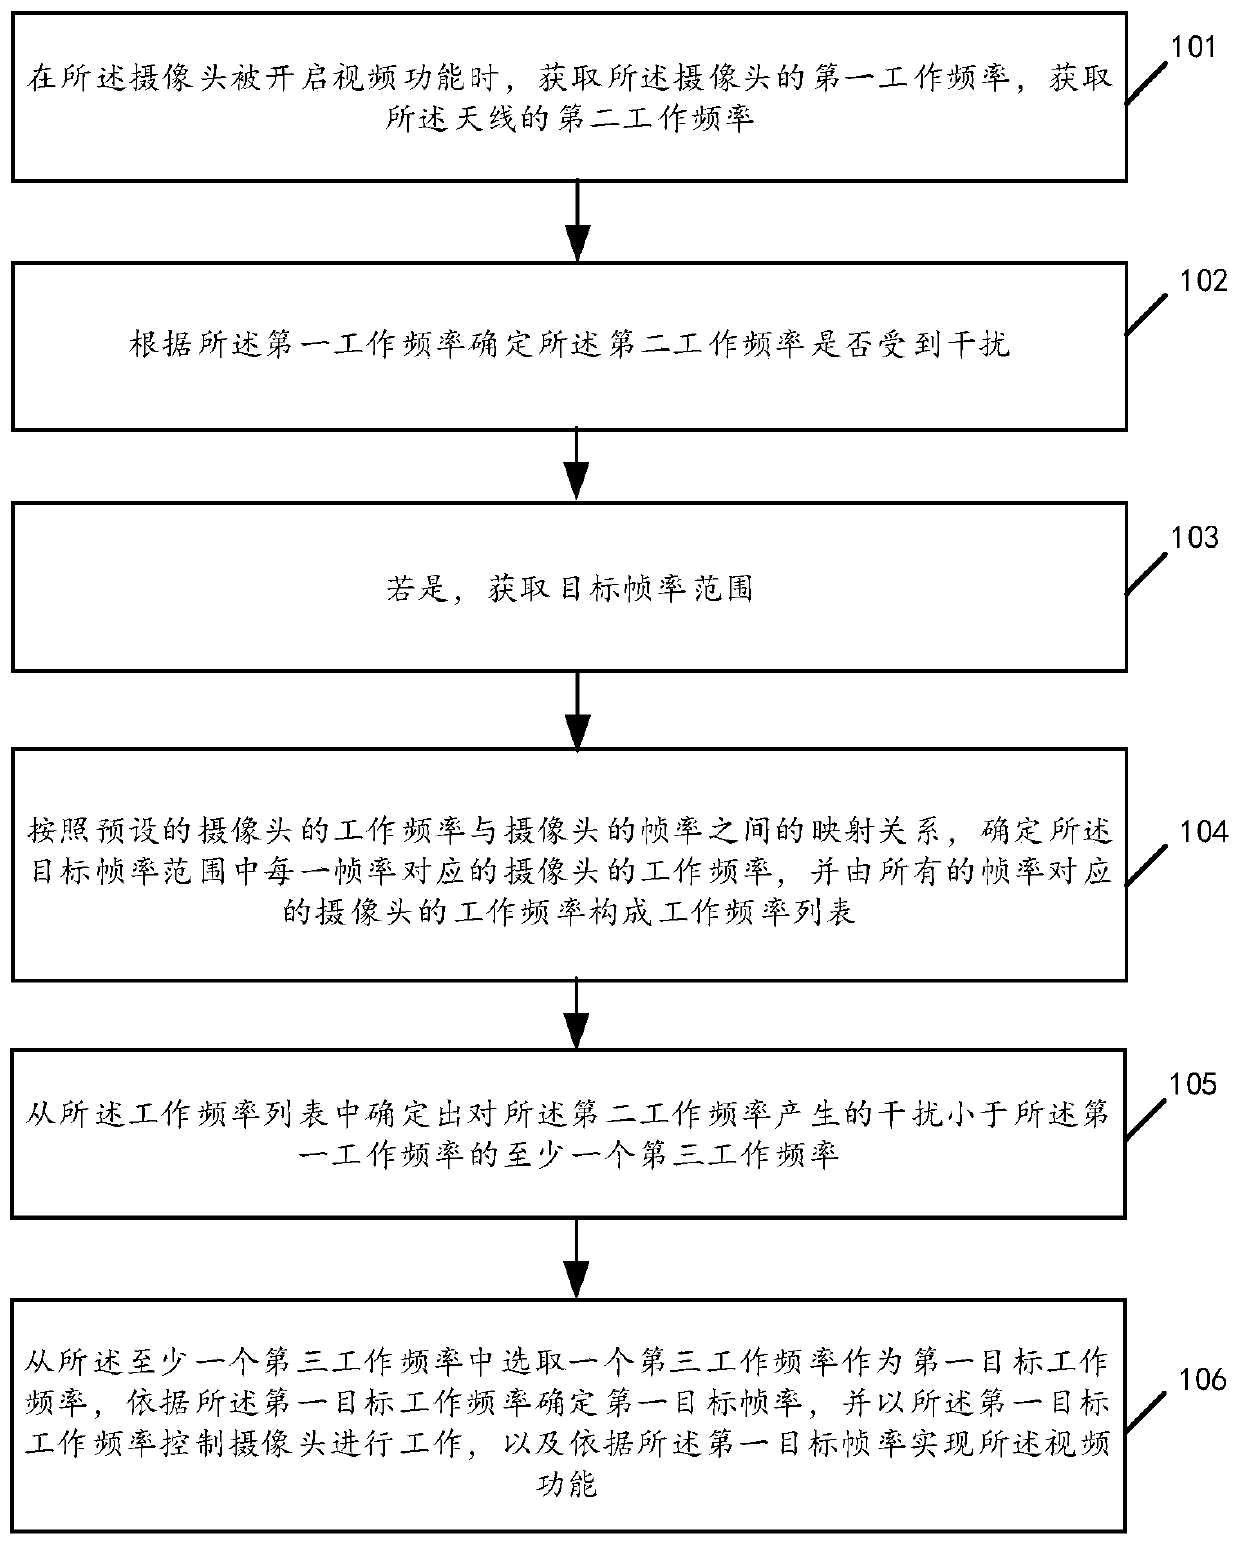 Electromagnetic interference control method and related product